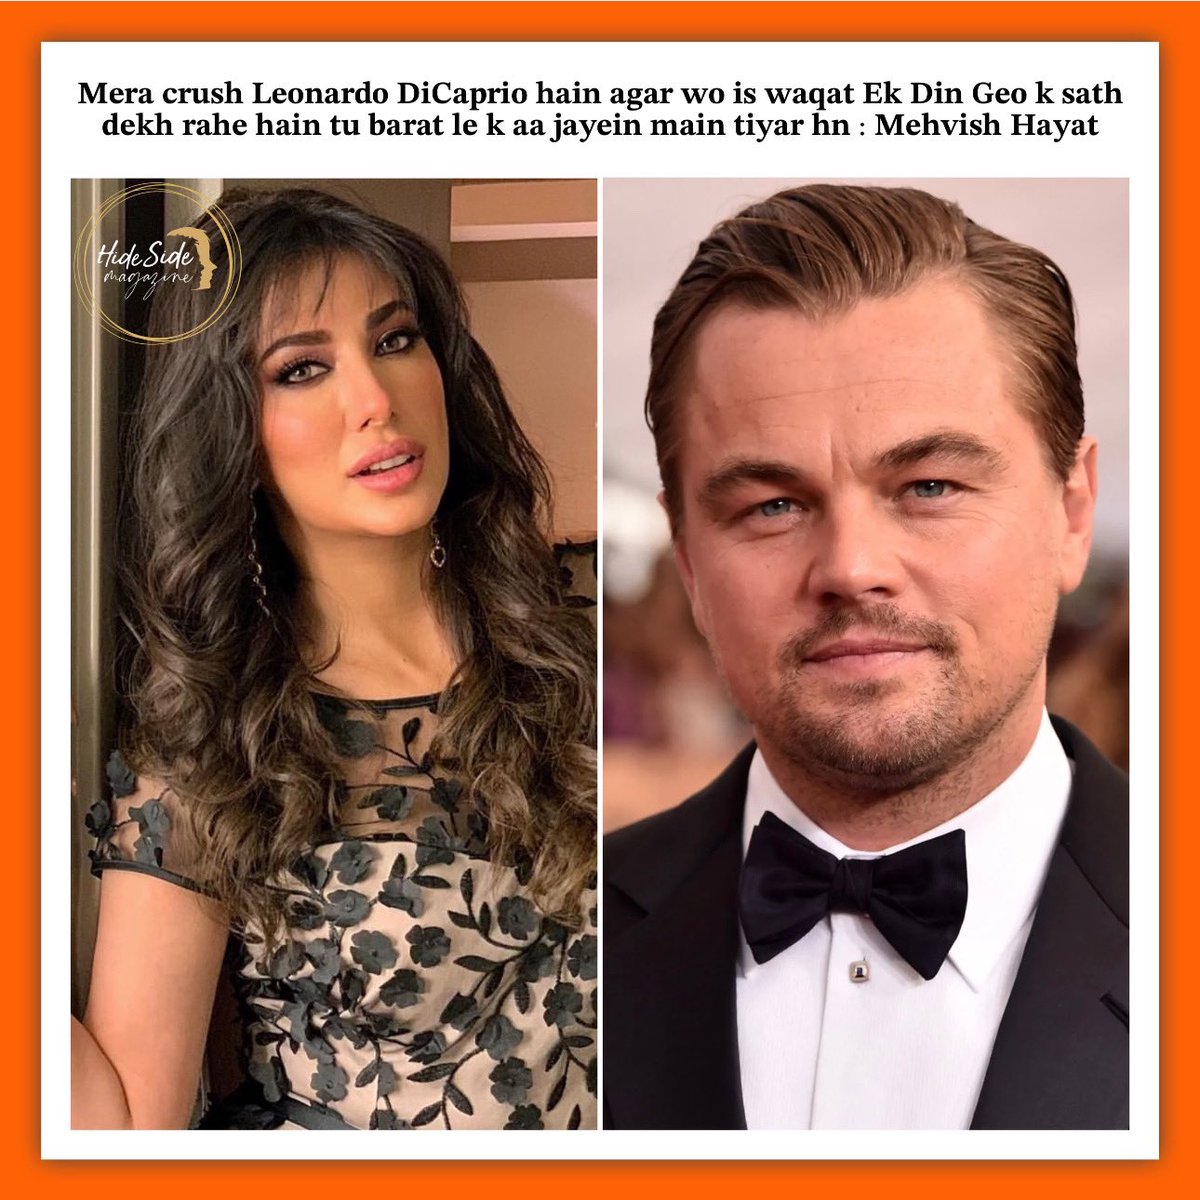 On Eid special episode Ek Din Geo k Sath Mehvish Hayat says my always crush was American actor and film producer Leonardo DiCaprio if he is watching this episode he can come with Barat I’m ready to marry with him . 👍🏻 #hidesidemagazine ✨📸✨ #mehwishhayat #leonardodicaprio